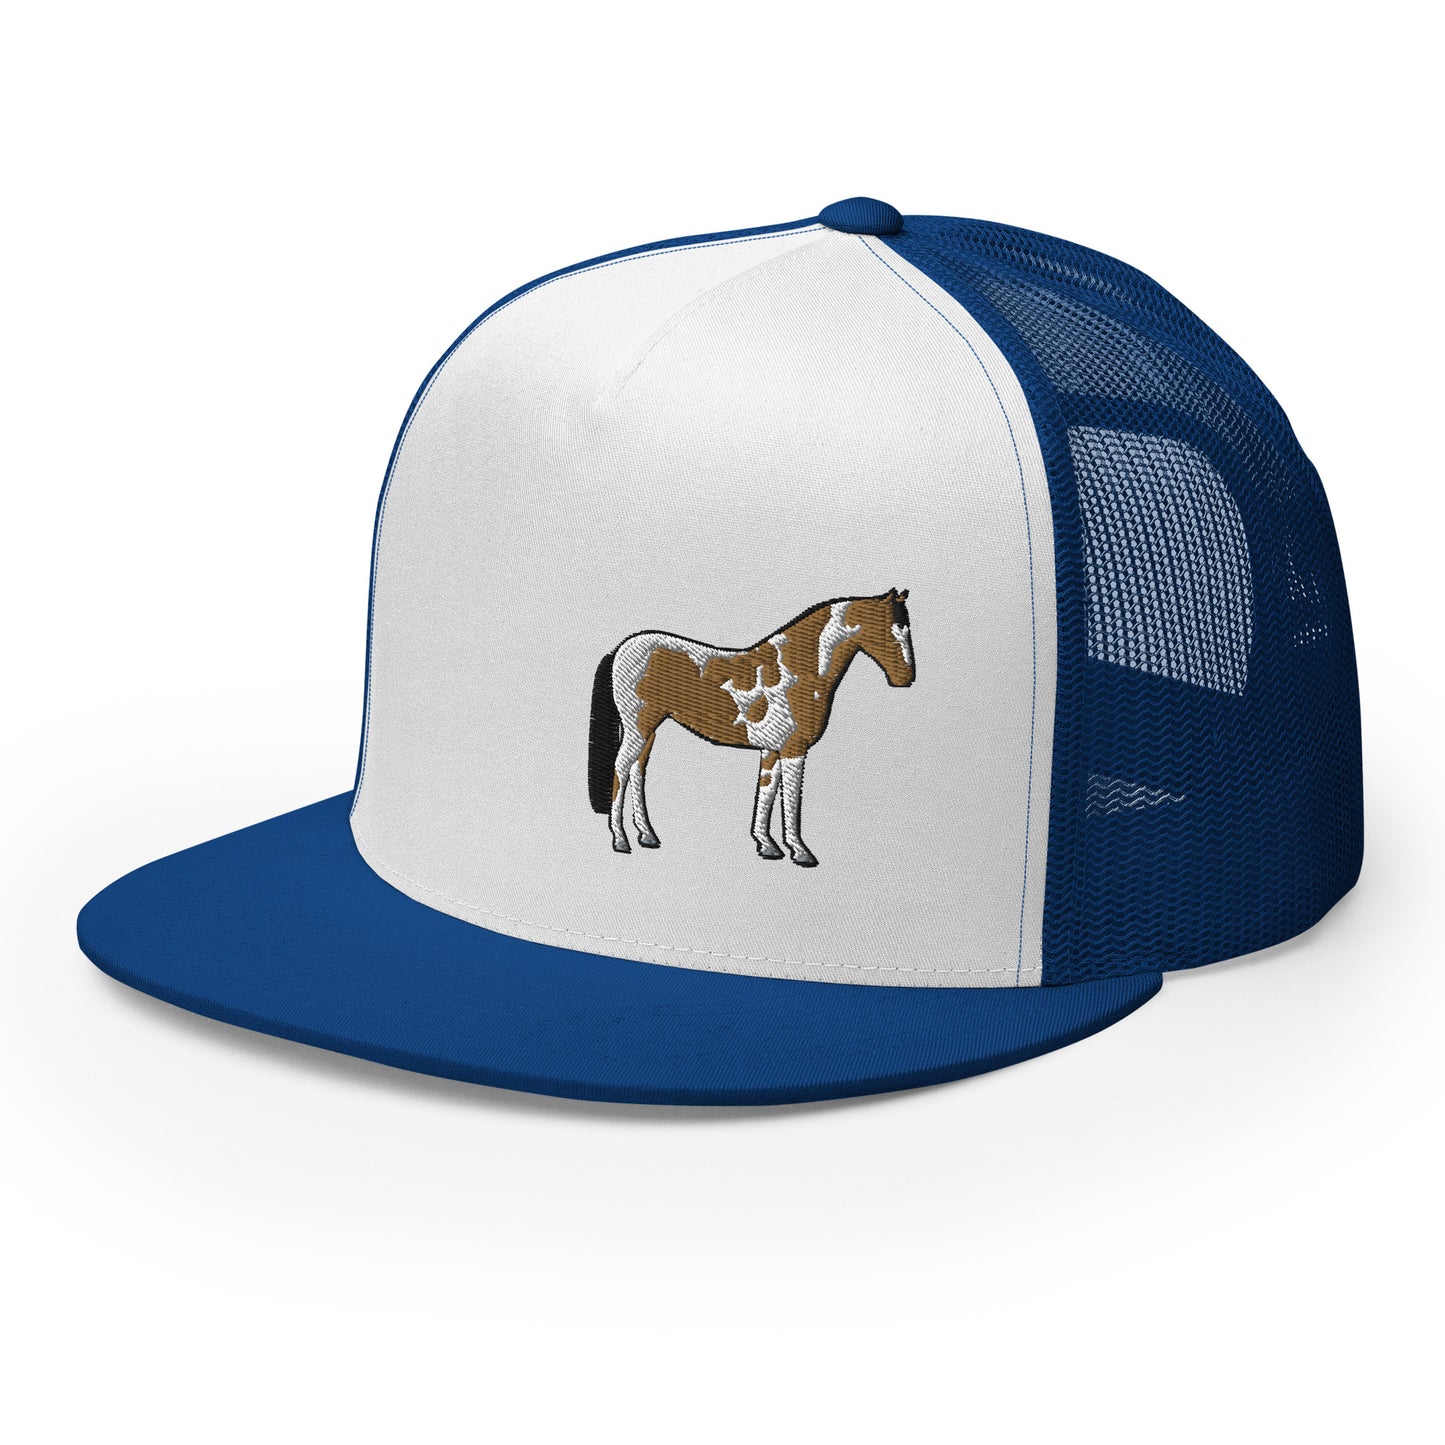 Brown and white Horse Trucker Cap| horse hat